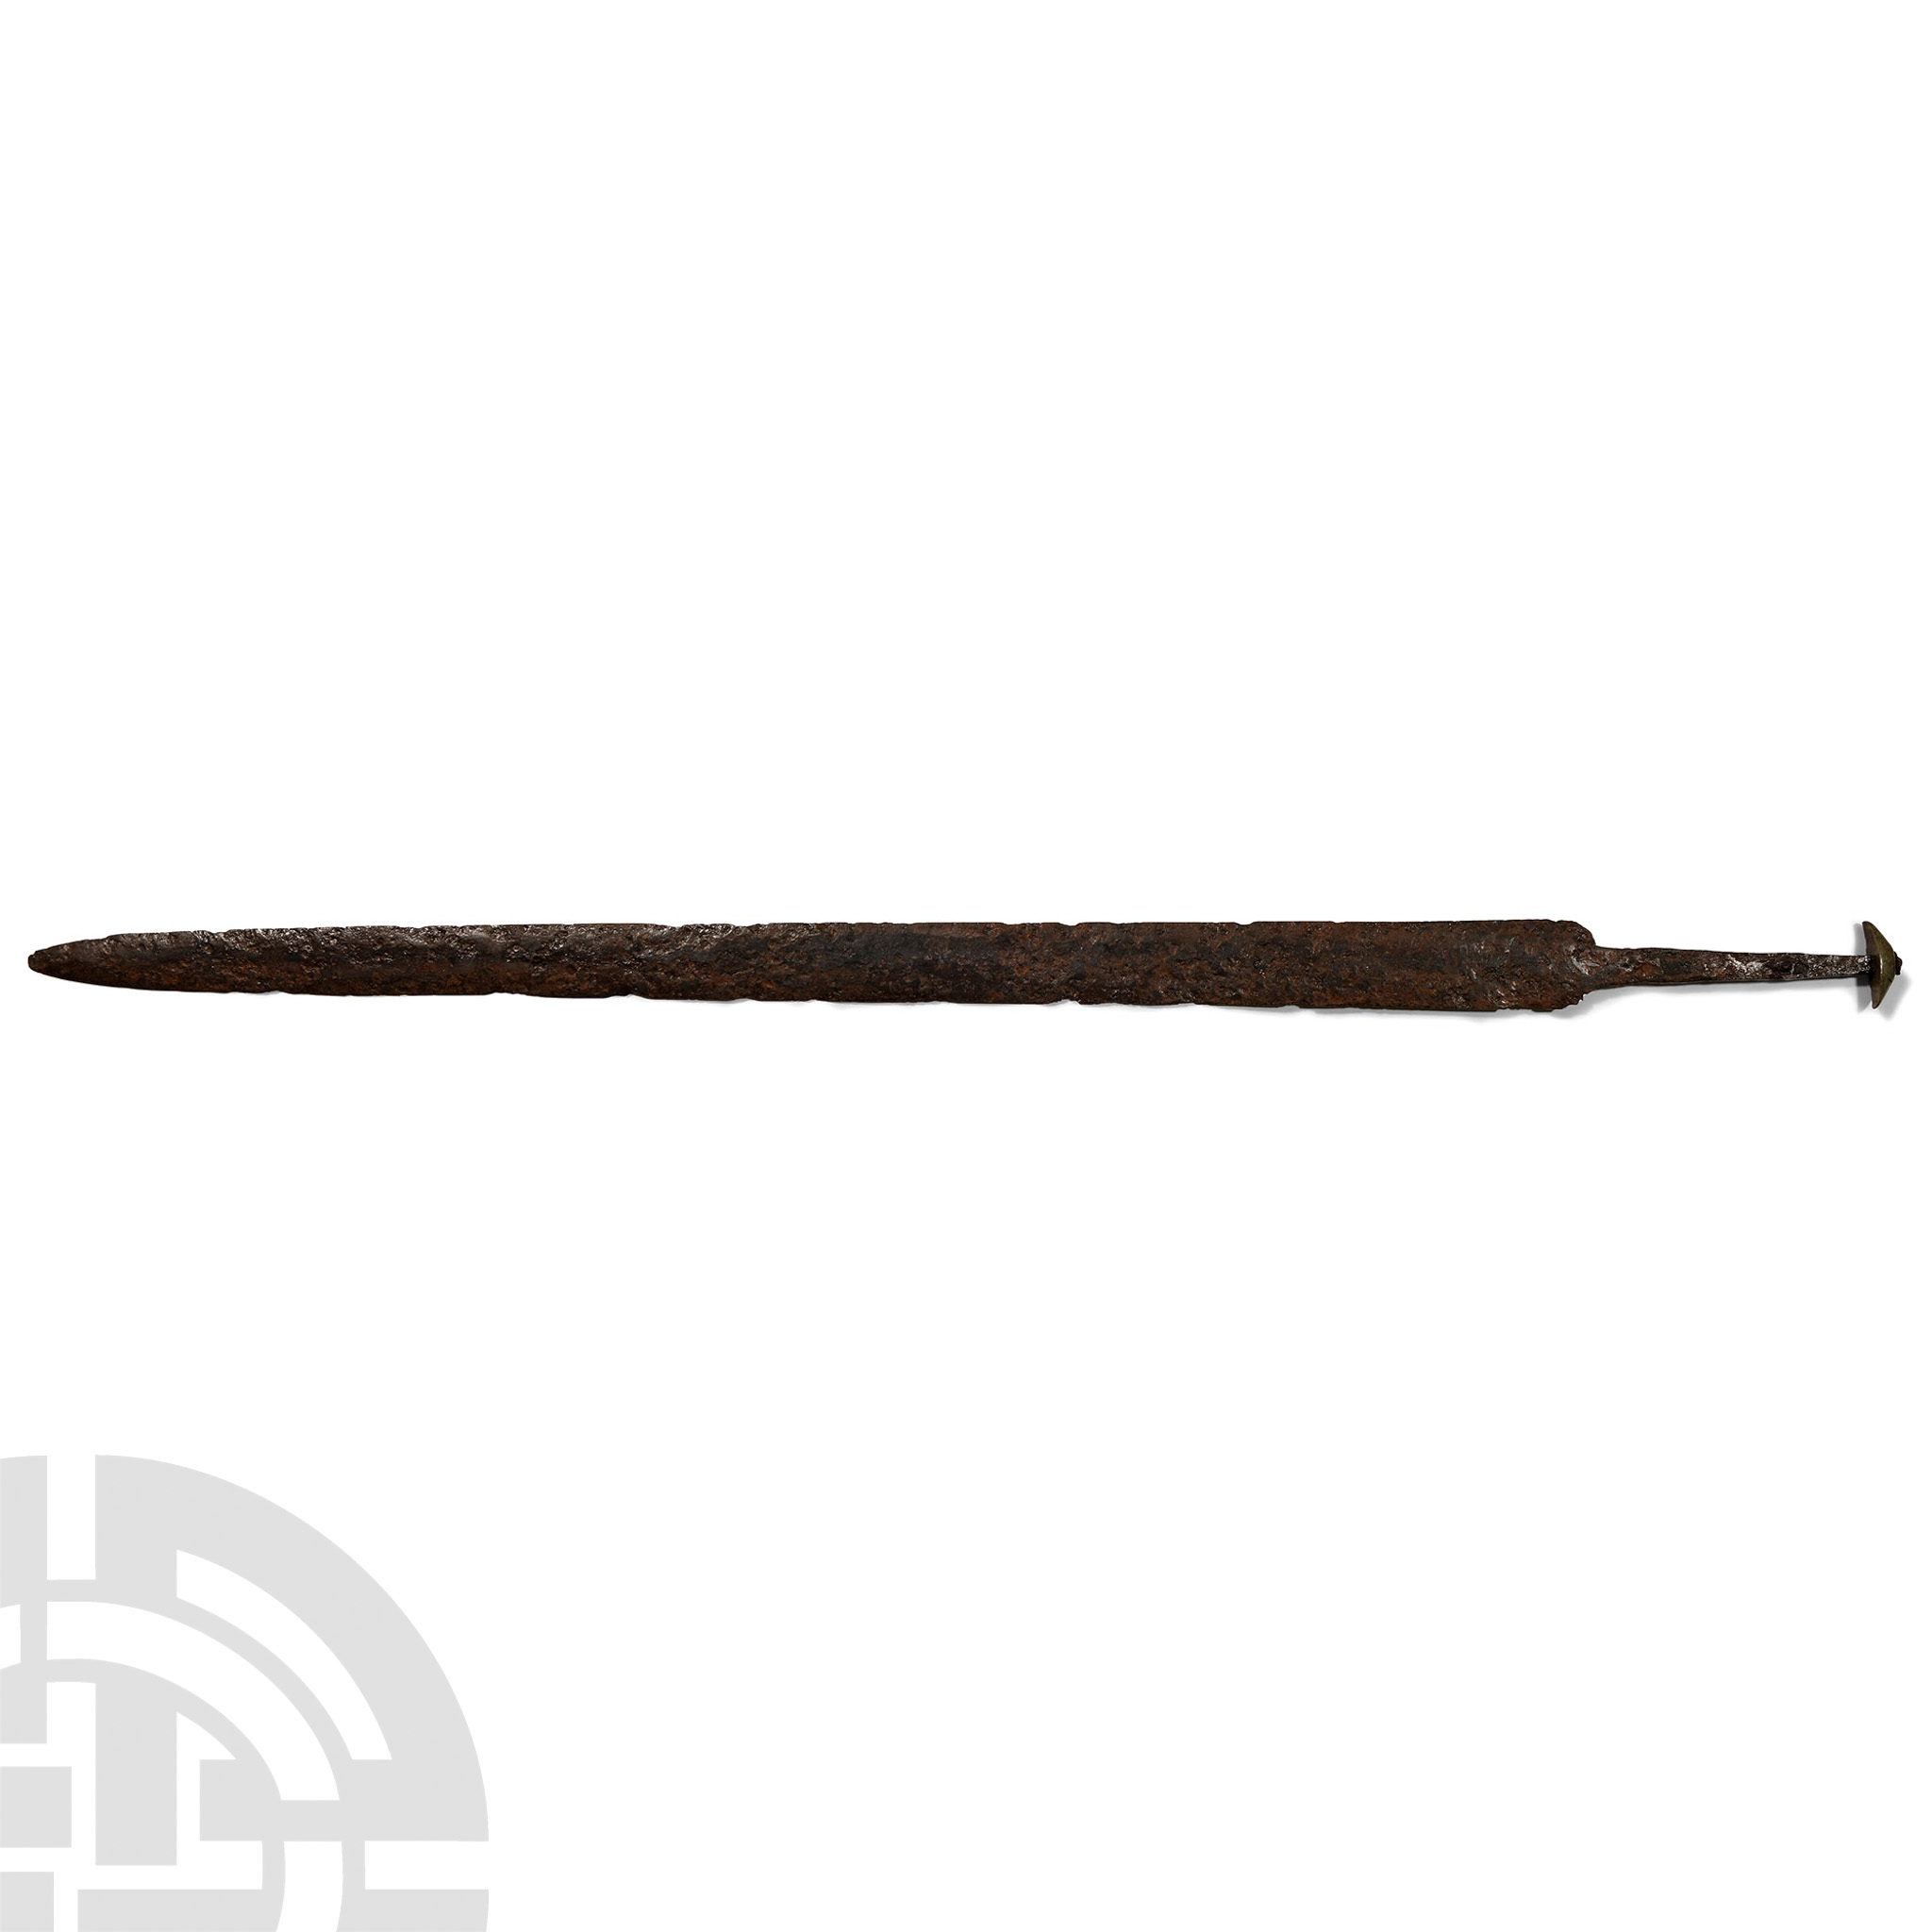 Migration Period Iron Sword with Bronze Pommel - Image 2 of 2